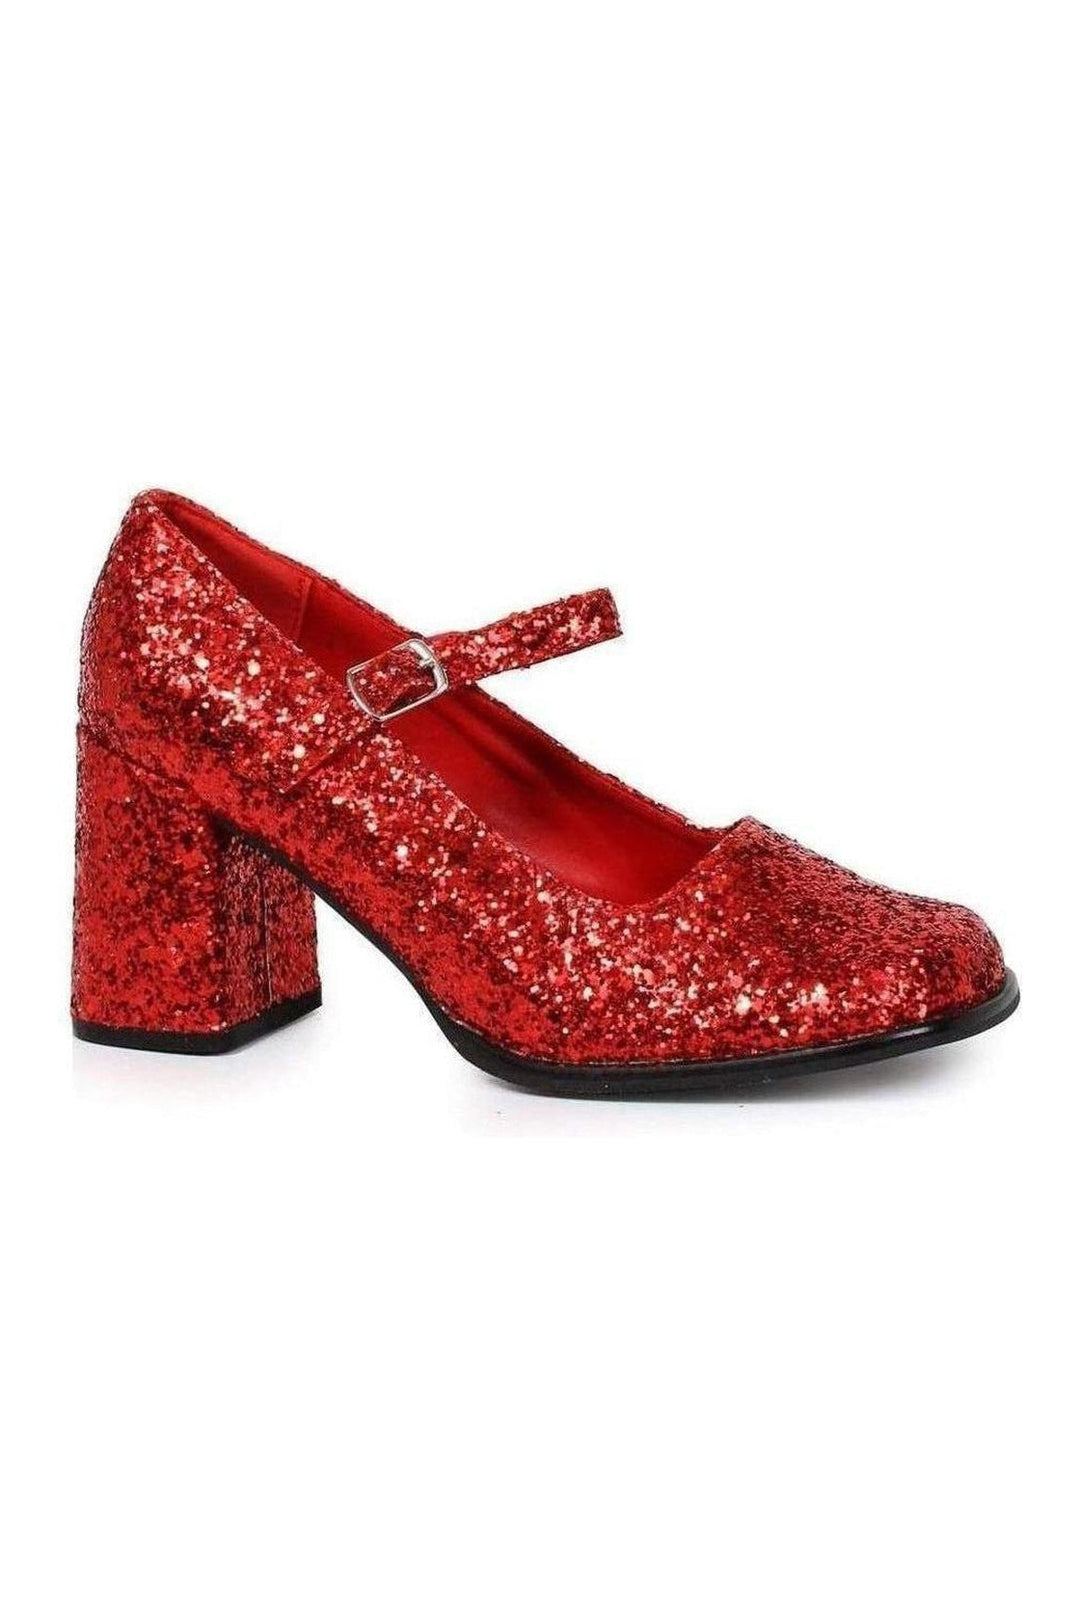 300-EDEN-G Mary Jane | Red Glitter-Ellie Shoes-Red-Mary Janes-SEXYSHOES.COM